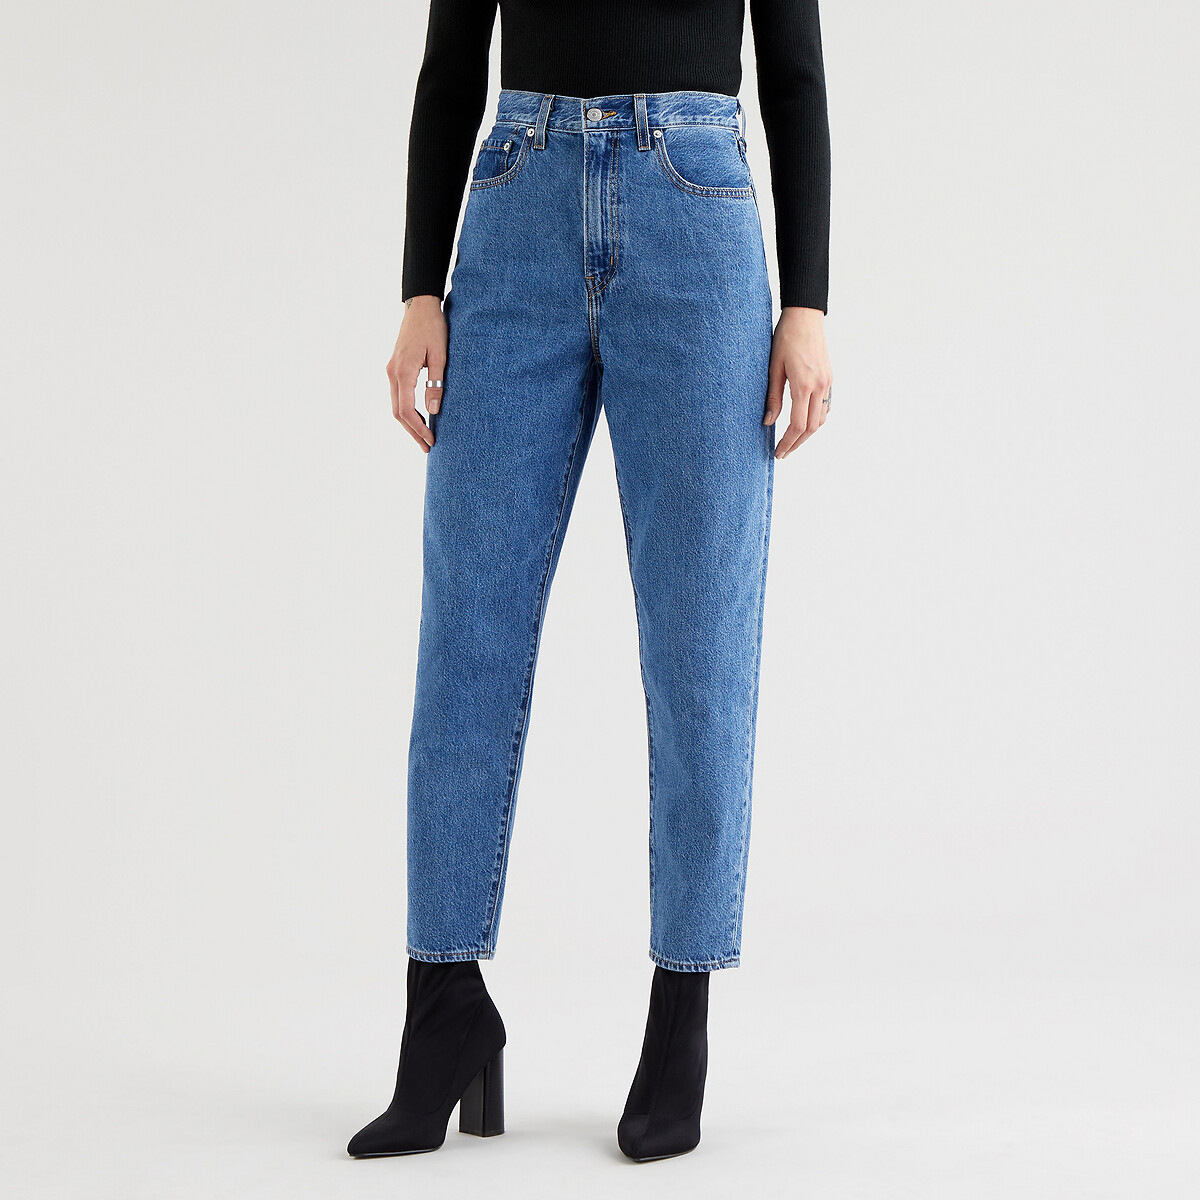 High Waist Loose Taper Jeans  LEVI'S image 0